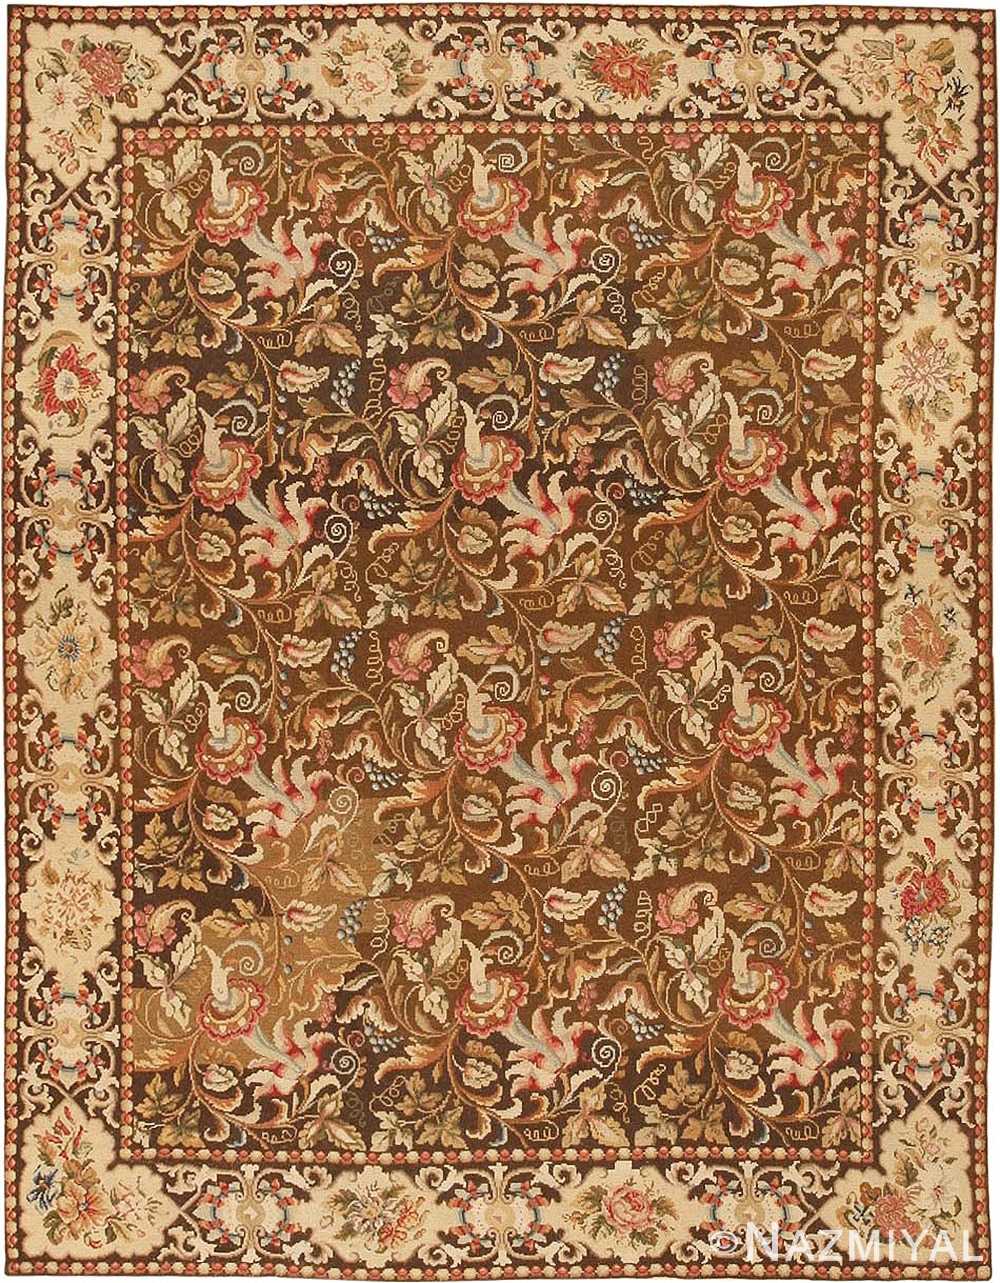 Floral Antique English Needlepoint Rug #3000 by Nazmiyal Antique Rugs